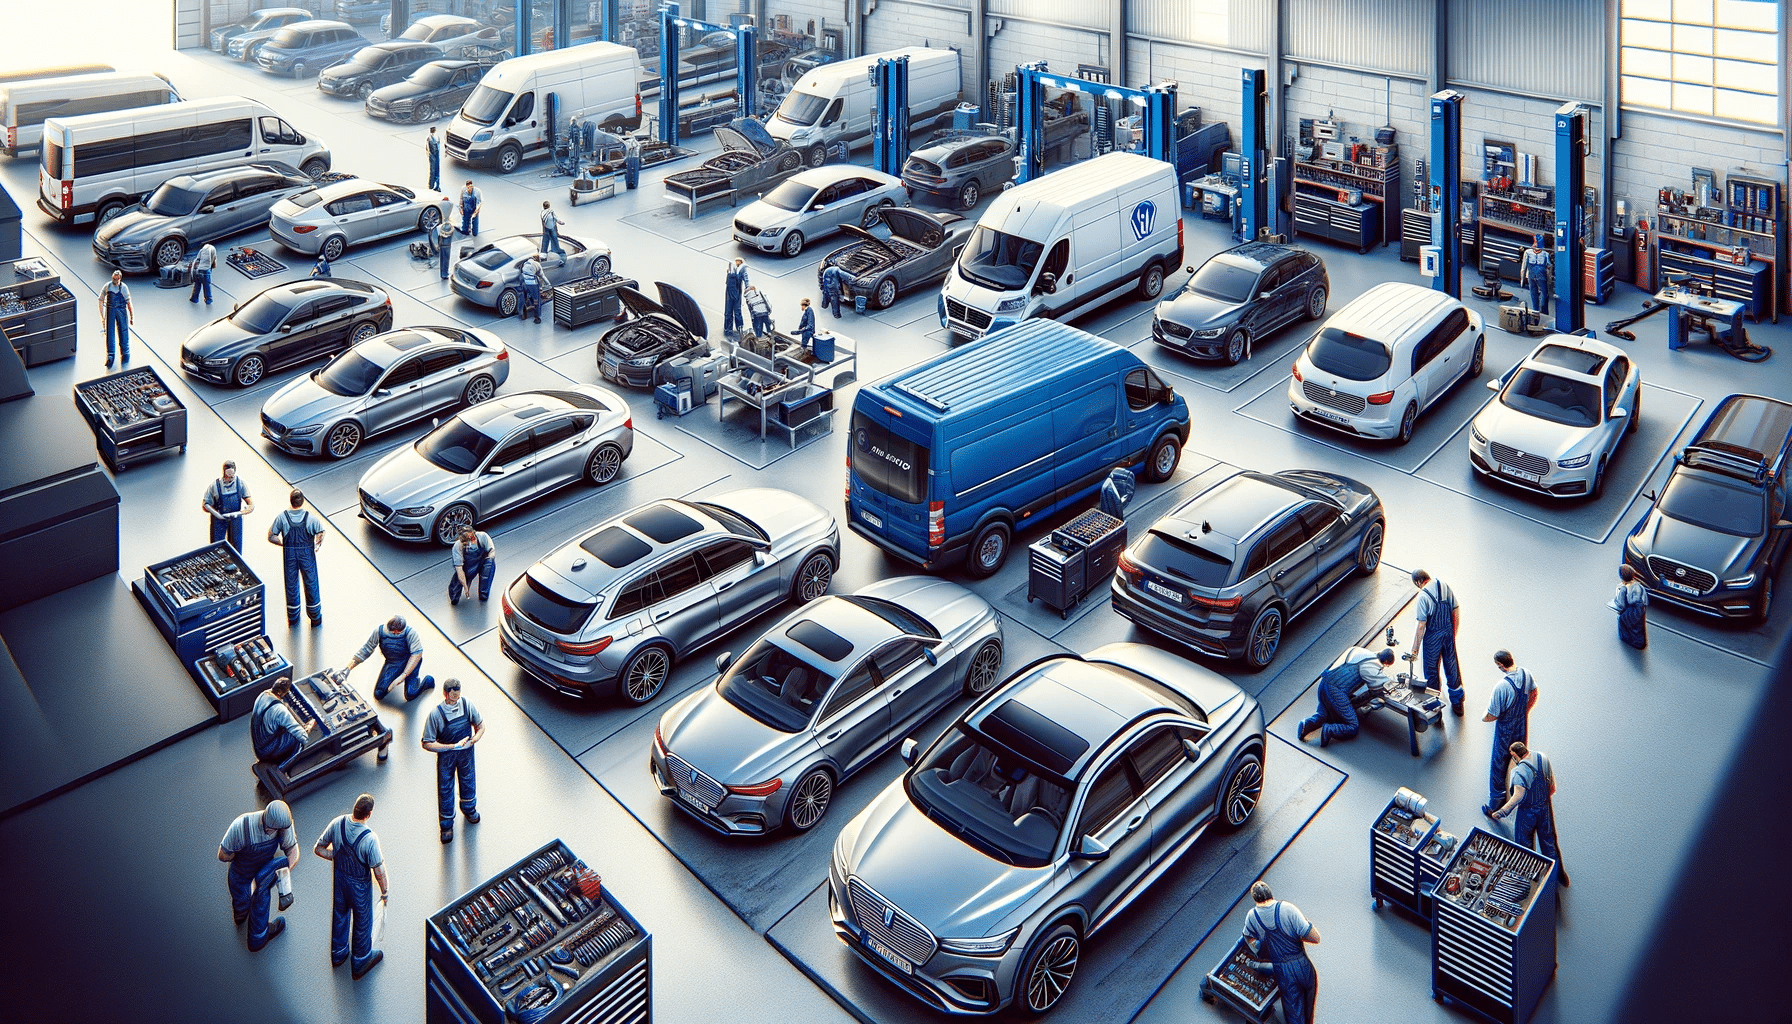 Image-of-a-variety-of-fleet-vehicles-including-sedans-suvs-and-commercial-vans-receiving-maintenance-and-repair-services-at-albion-auto